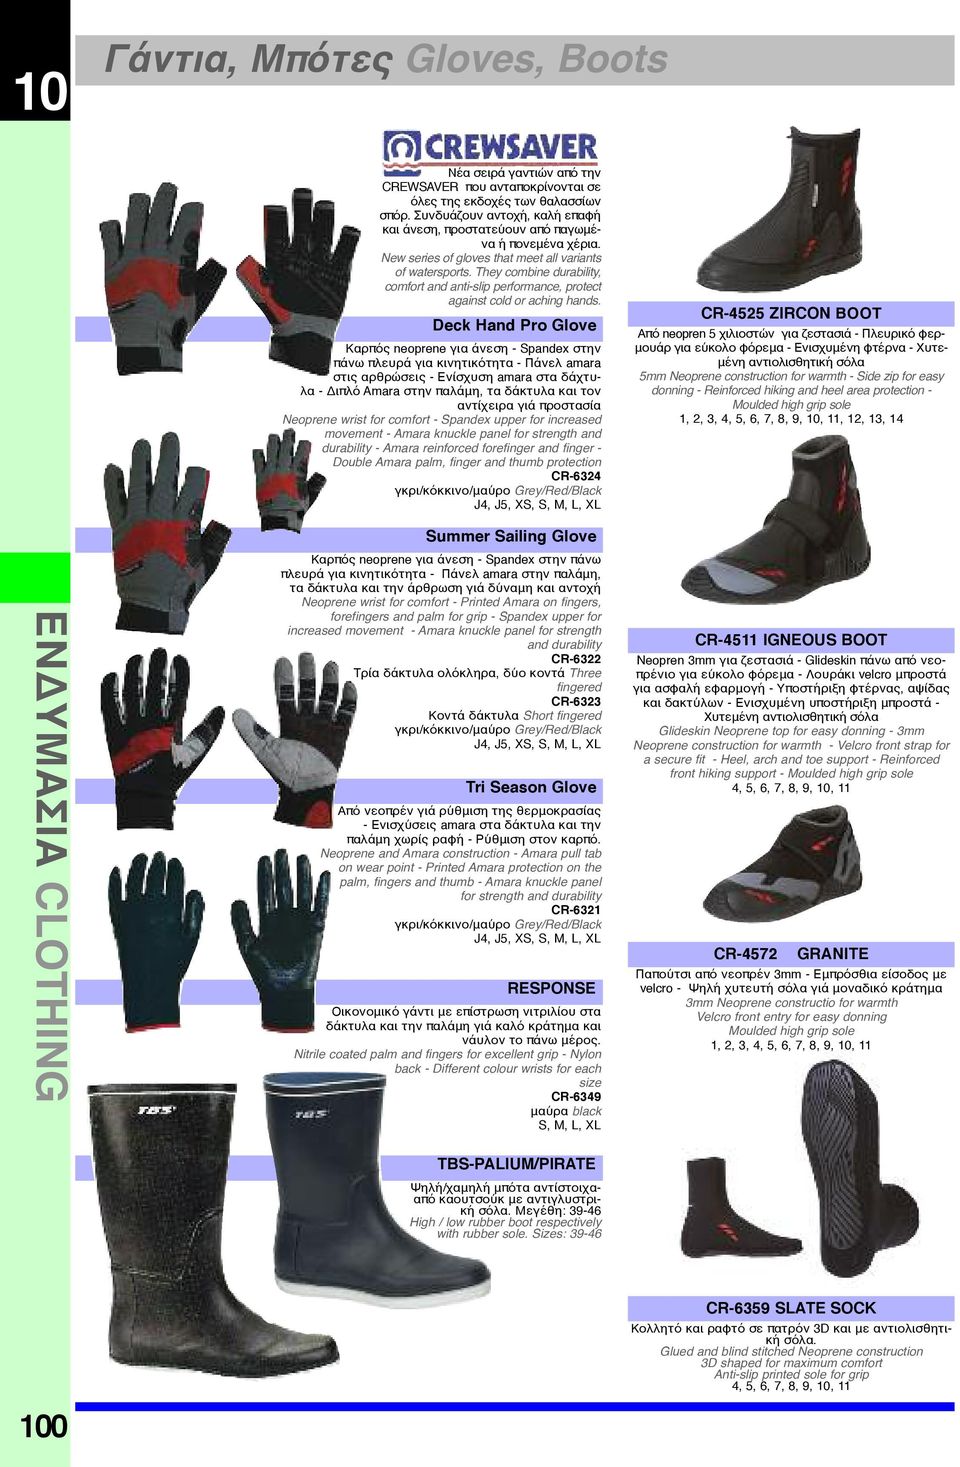 They combine durability, comfort and anti-slip performance, protect against cold or aching hands.